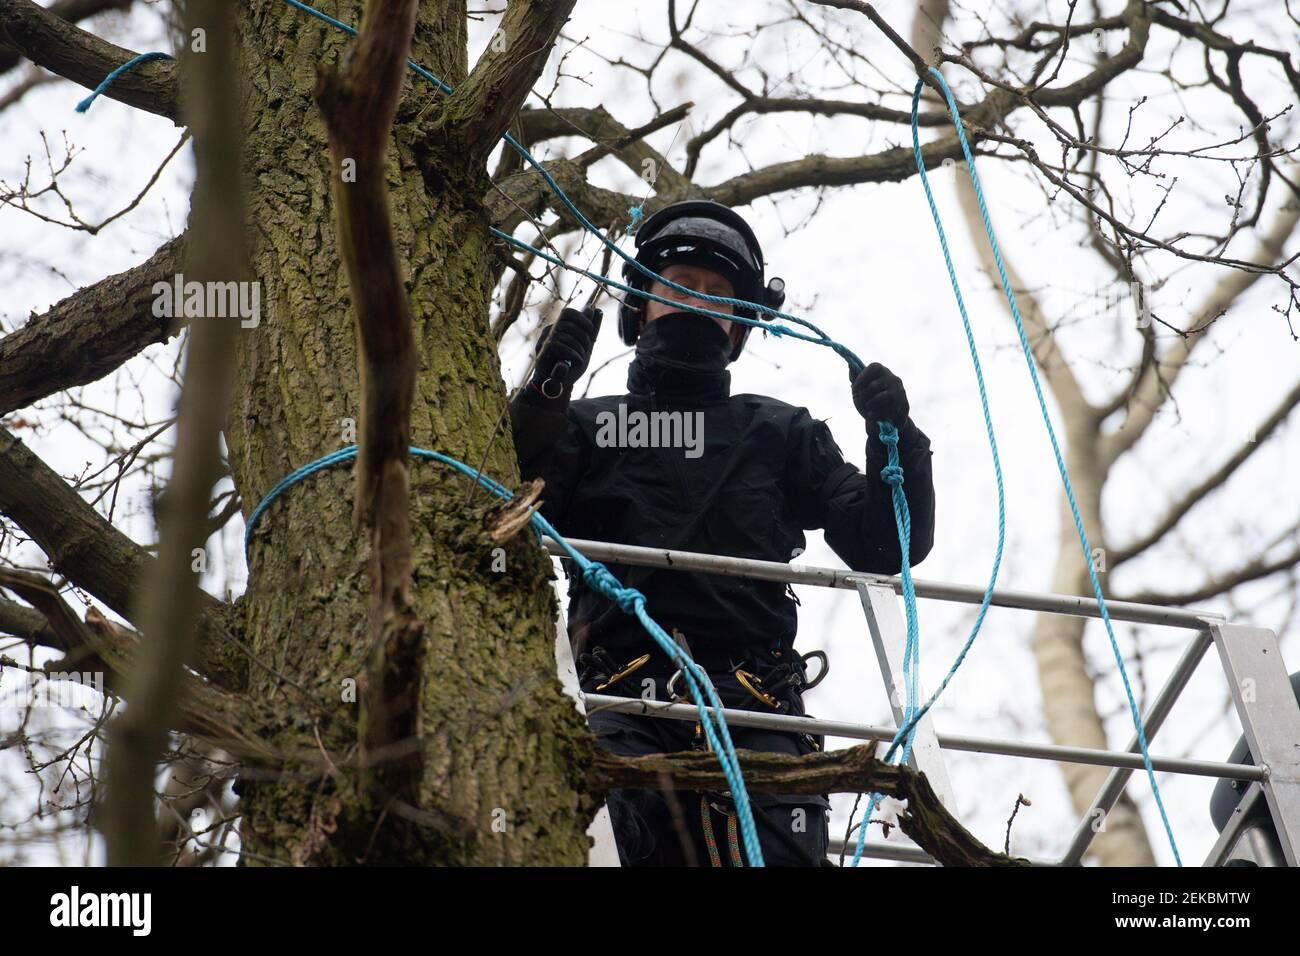 A police officer cuts ropes connecting treehouses occupied by anti-HS2 protesters, at an encampment in the ancient woodland at Poor's Piece Wood on the edge of Steeple Claydon in Buckinghamshire. Picture date: Tuesday February 23, 2021. Stock Photo